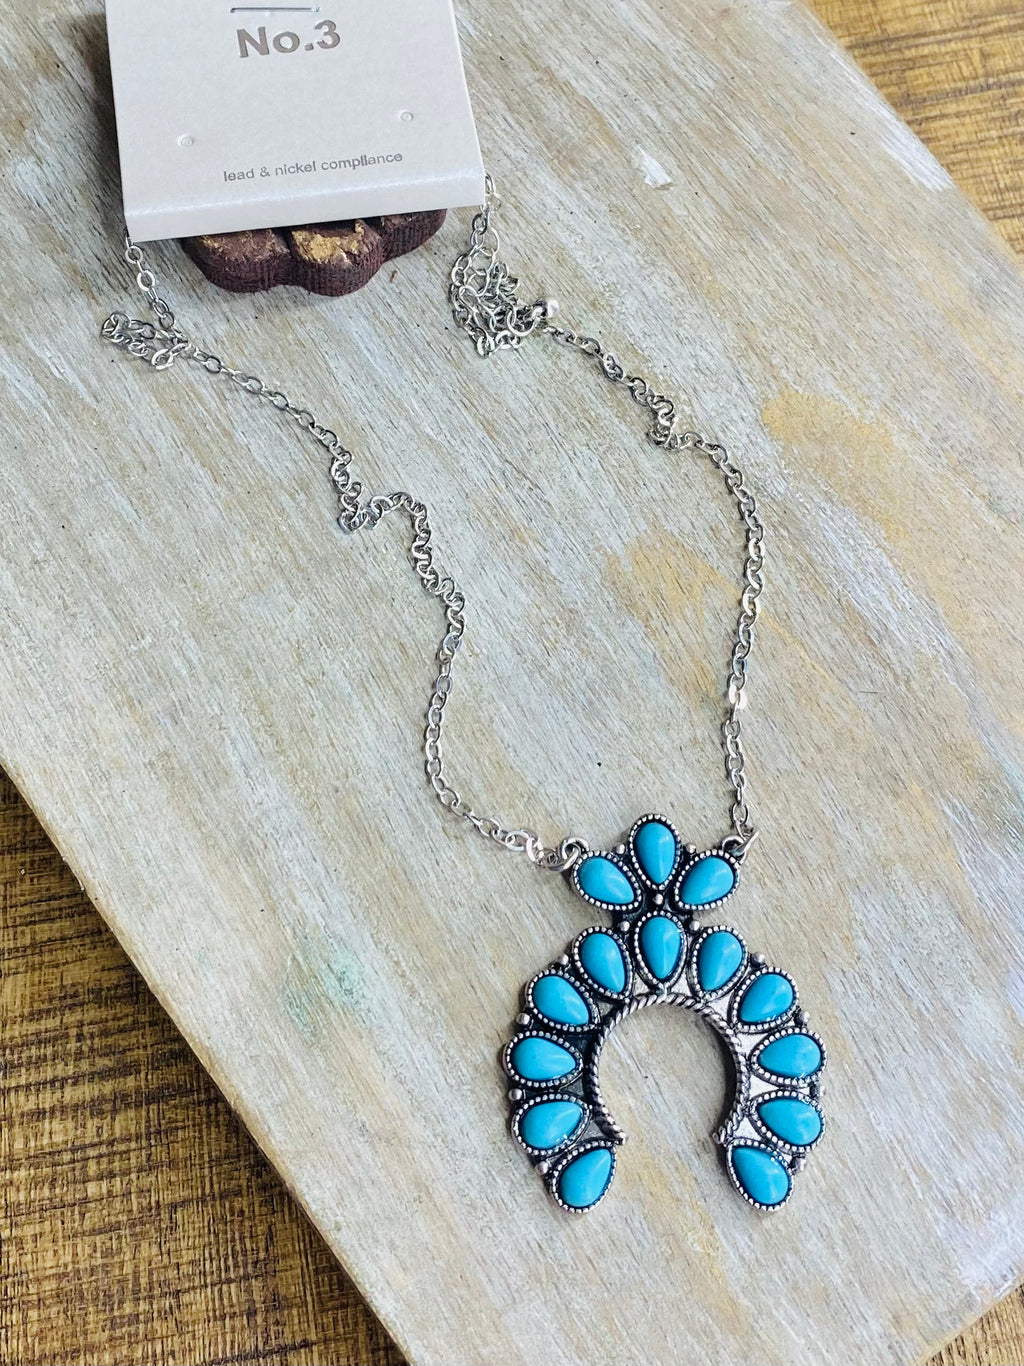 Turquoise Stone Squash Blossom Chain Necklace